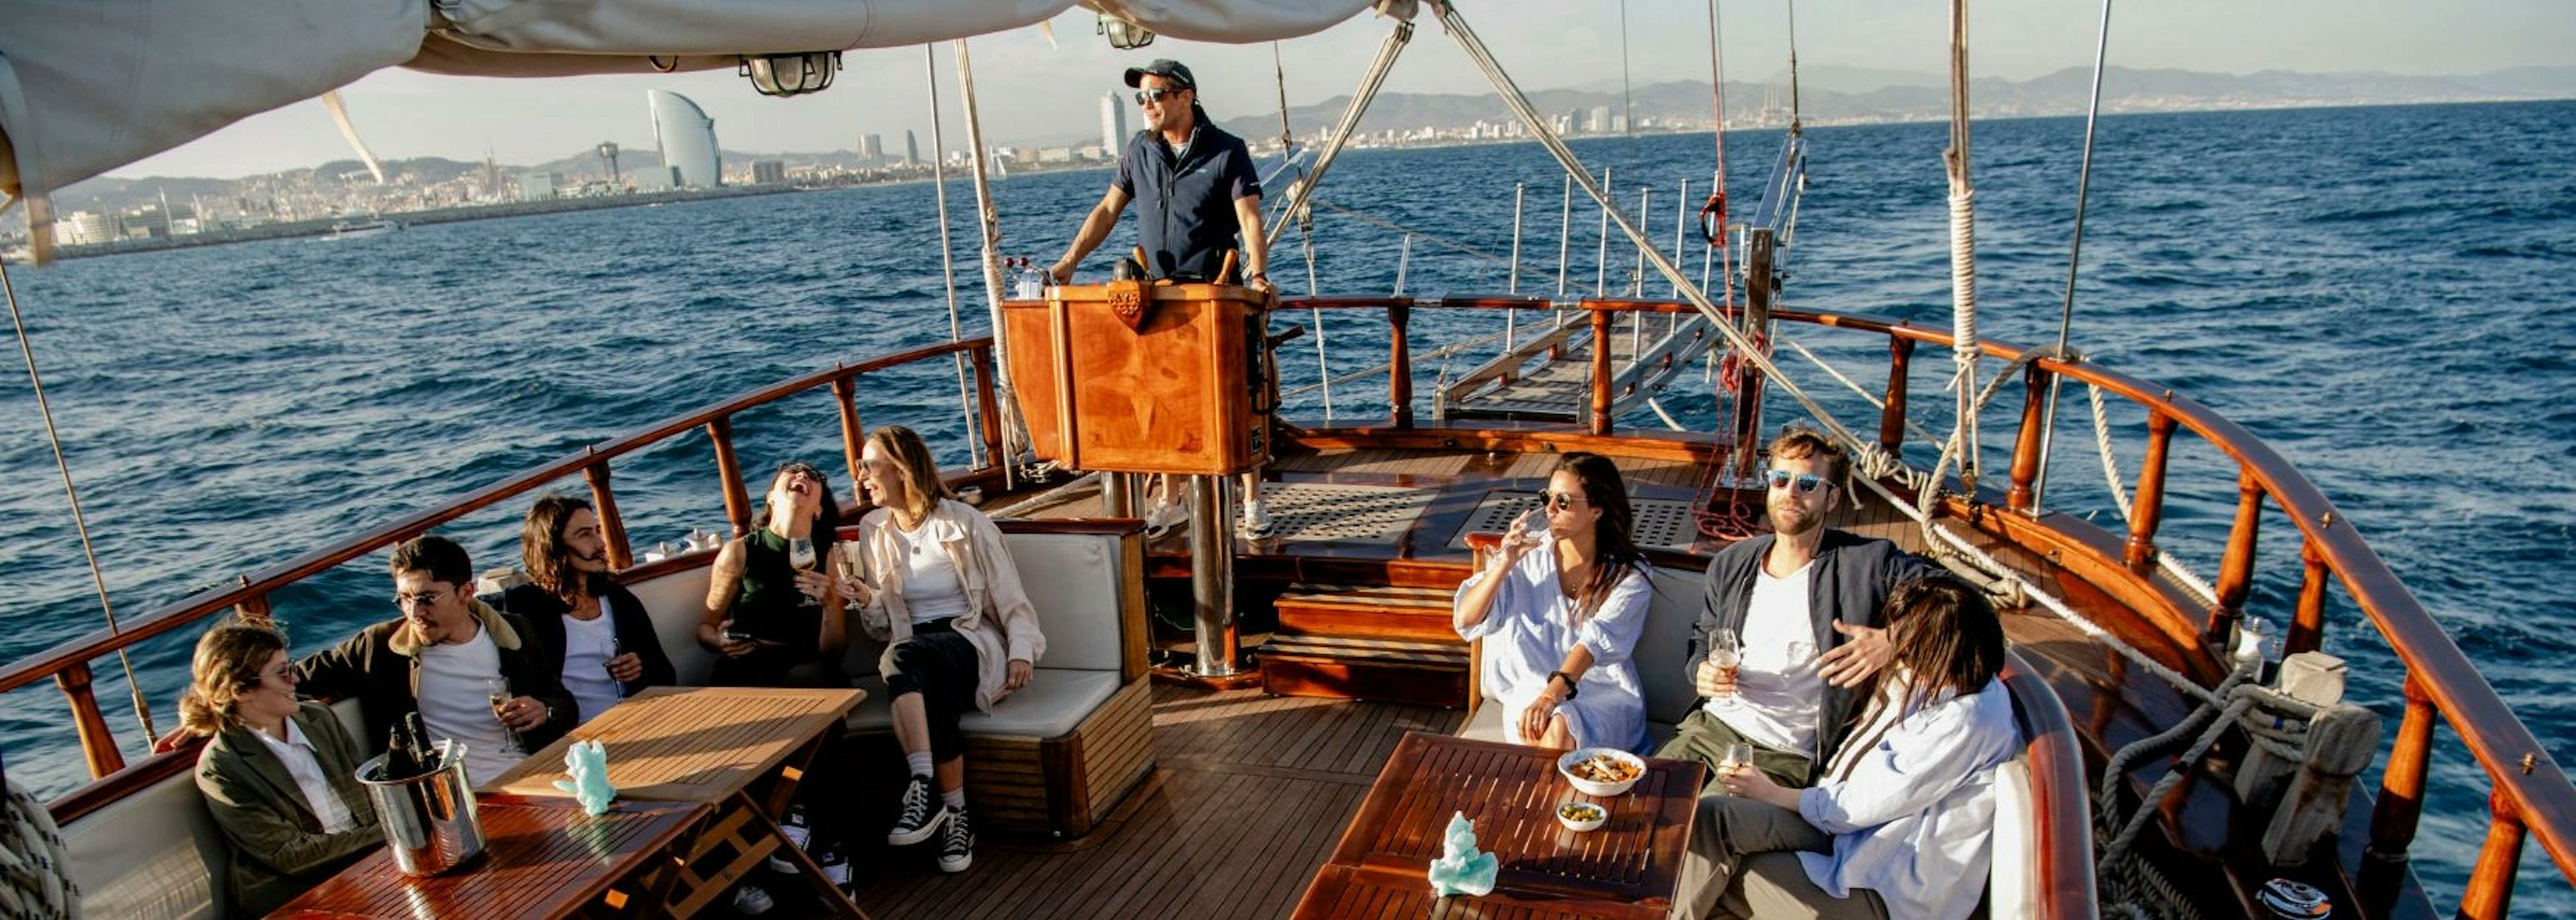 Live music show on a classic wooden boat with sunset option!